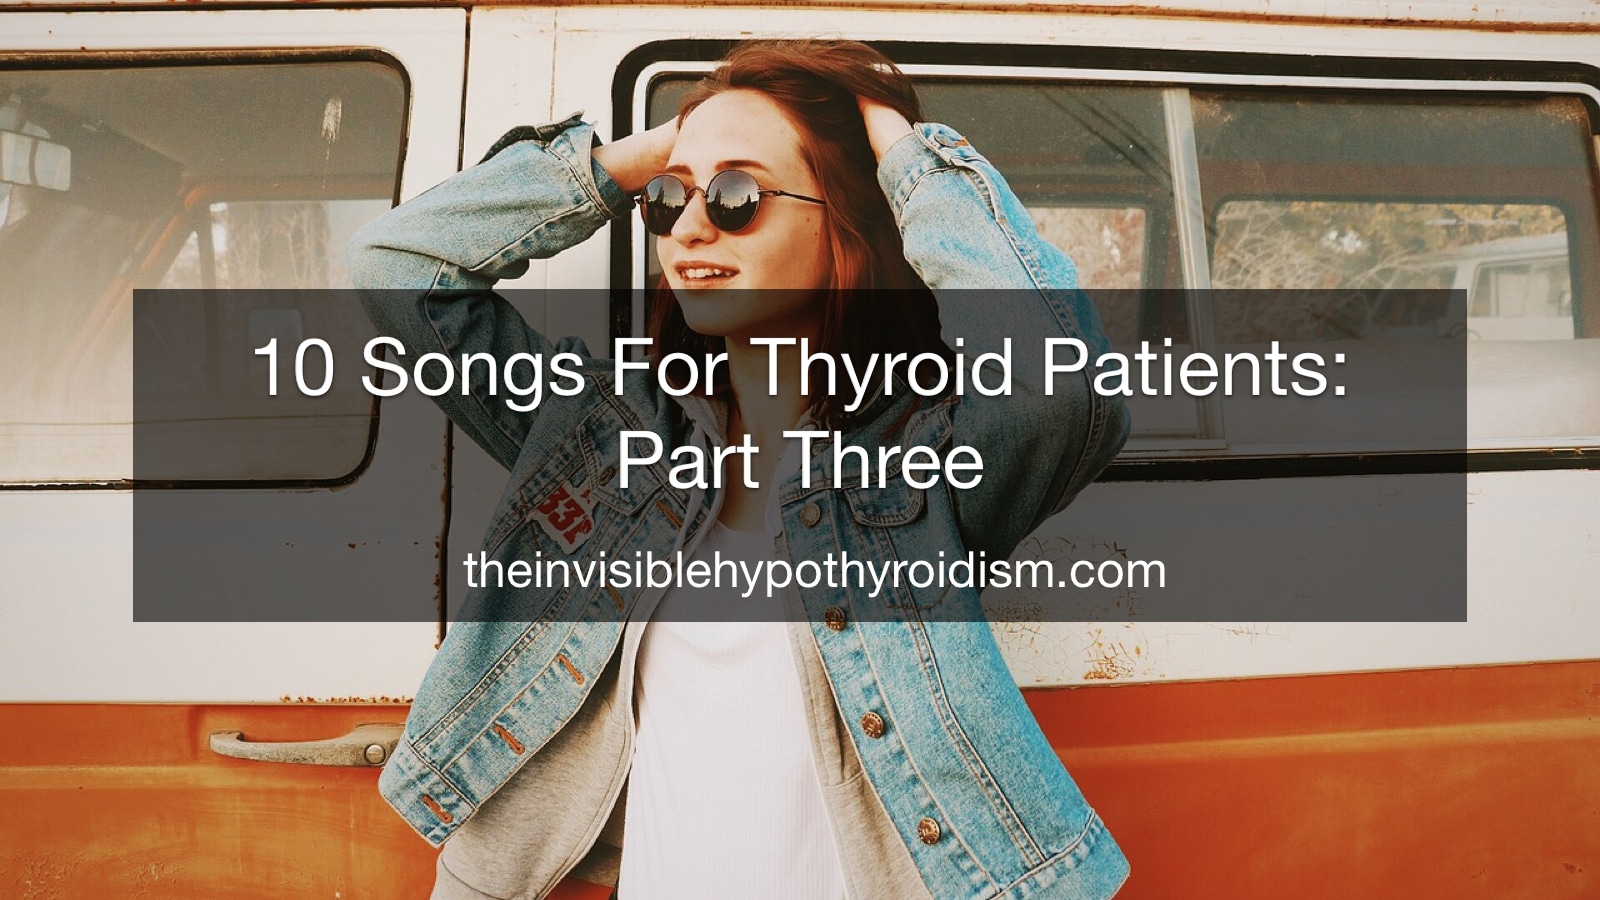 10 Songs For Thyroid Patients: Part Three